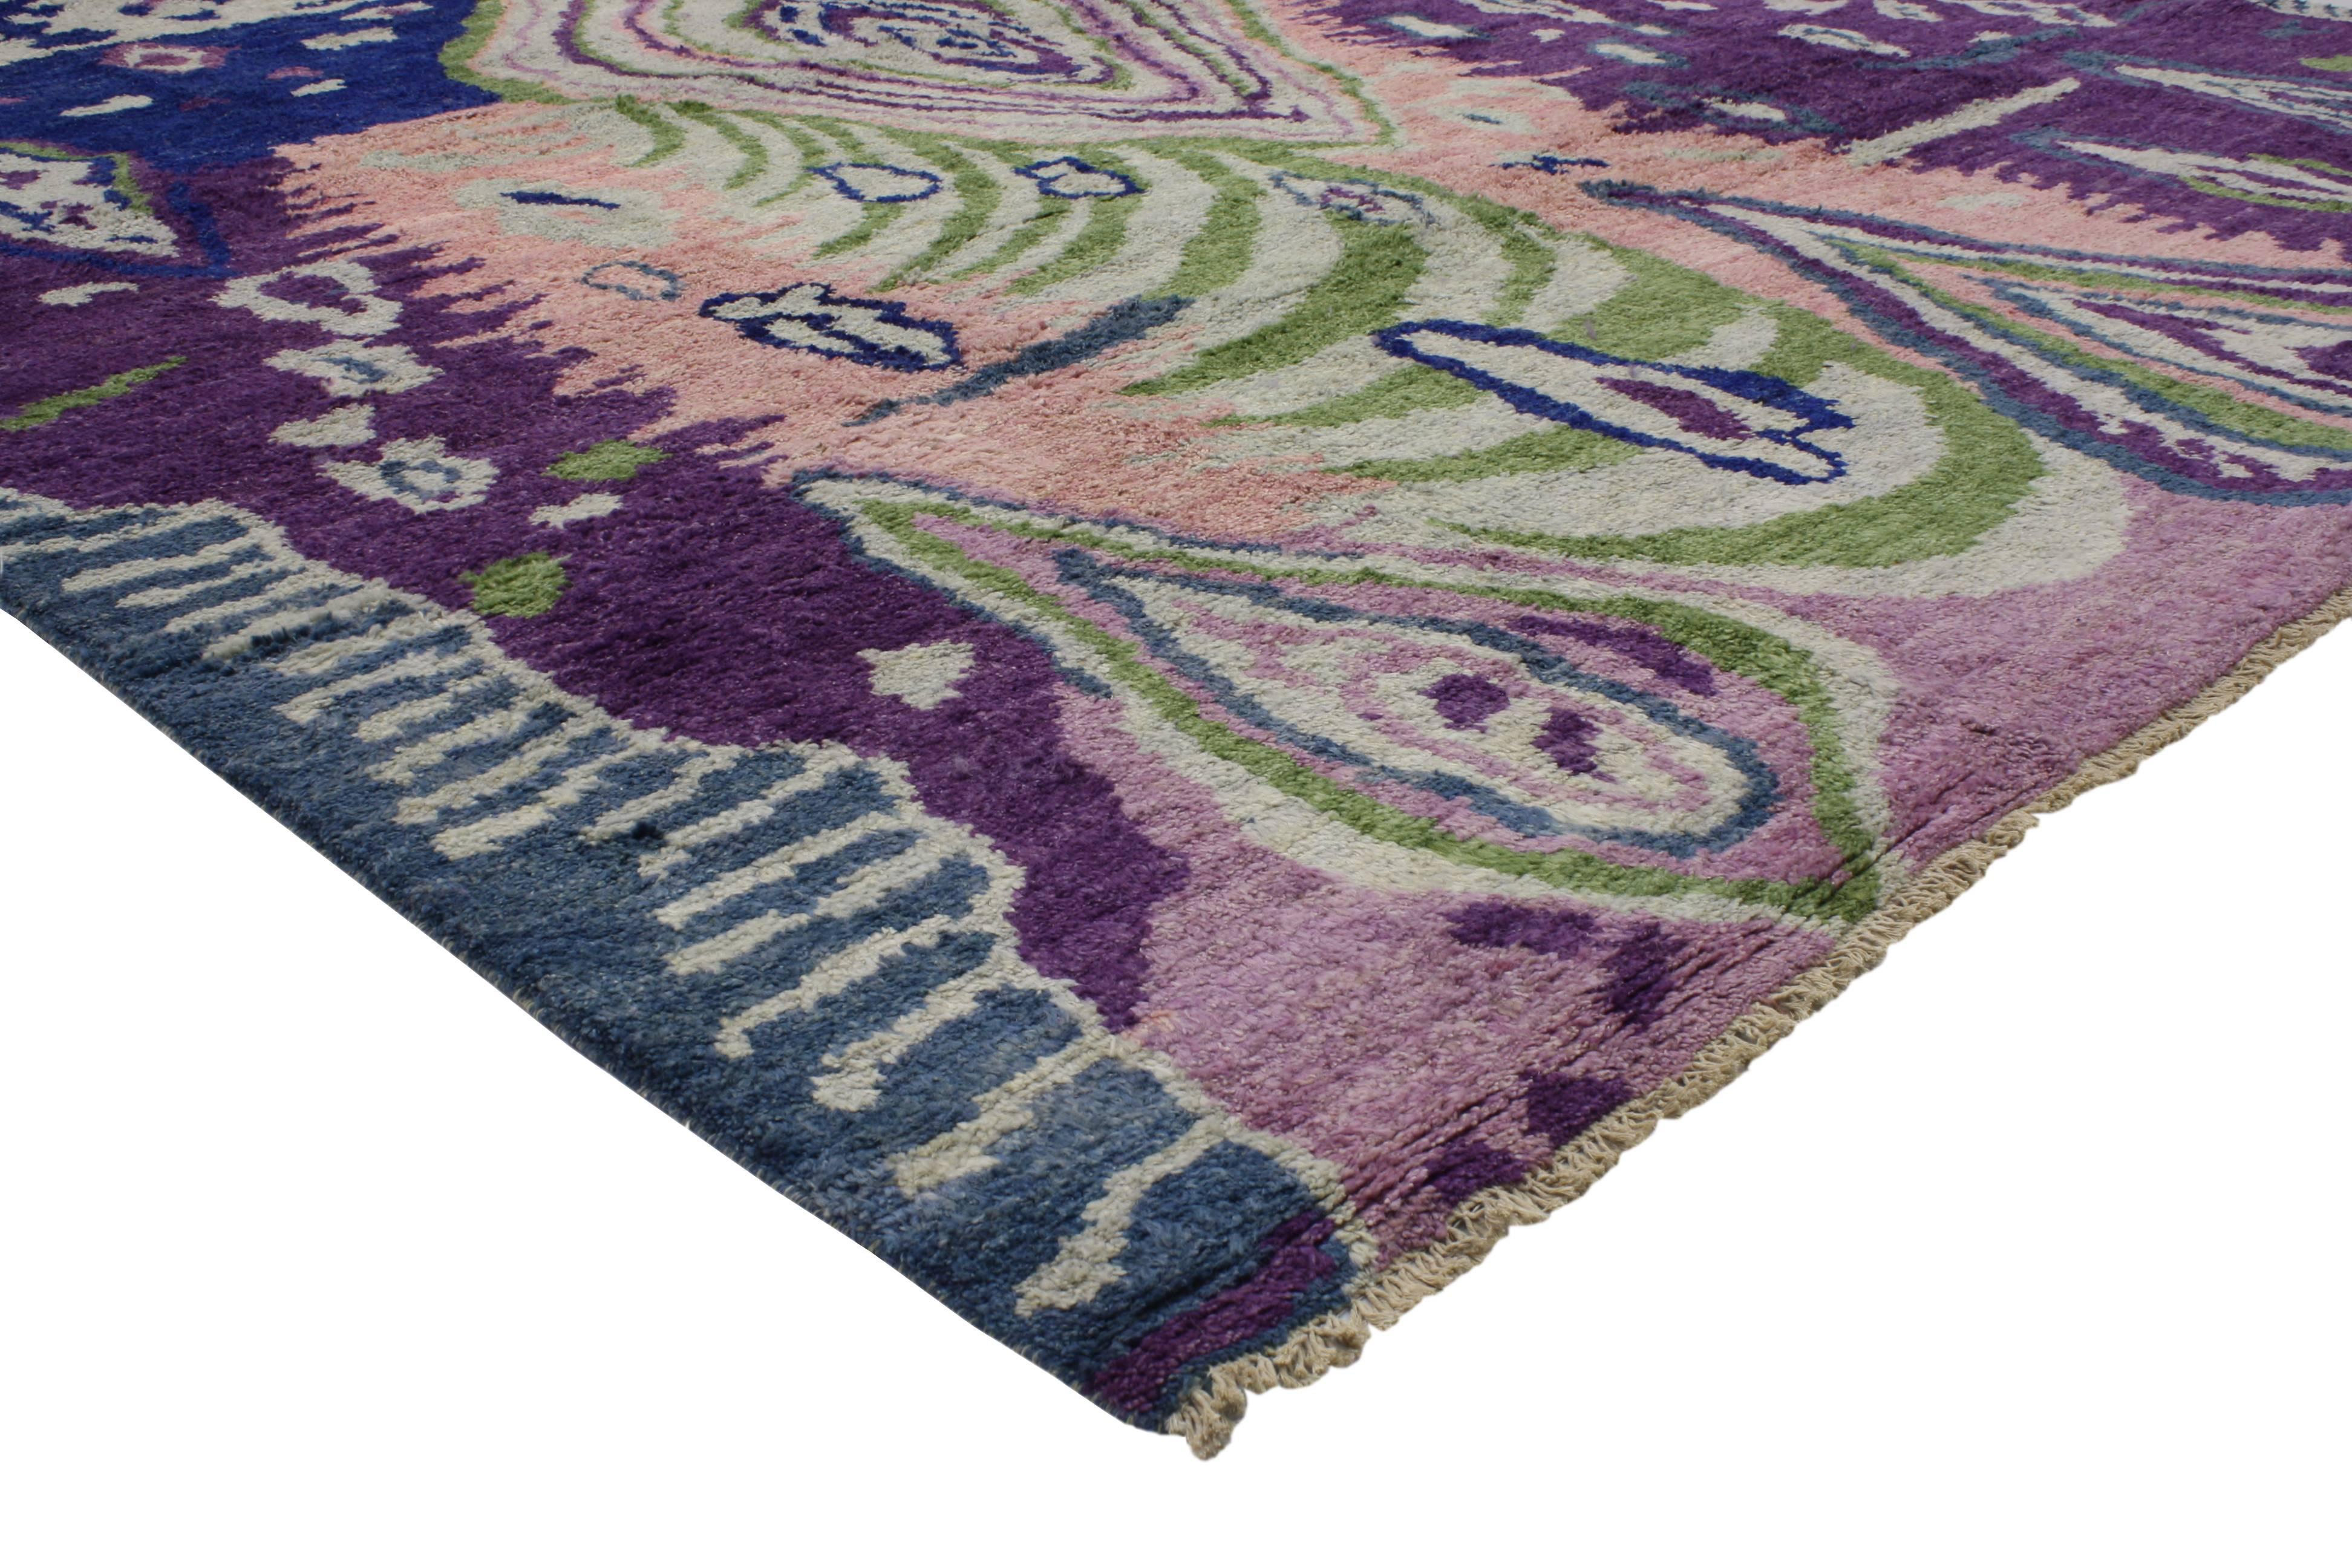 Representing a lifestyle and culture from a bygone era resonating with people today, this contemporary Moroccan style rug features a psychedelic abstract design attracting young hipsters to old hippies. Impeccably woven from hand-knotted wool in